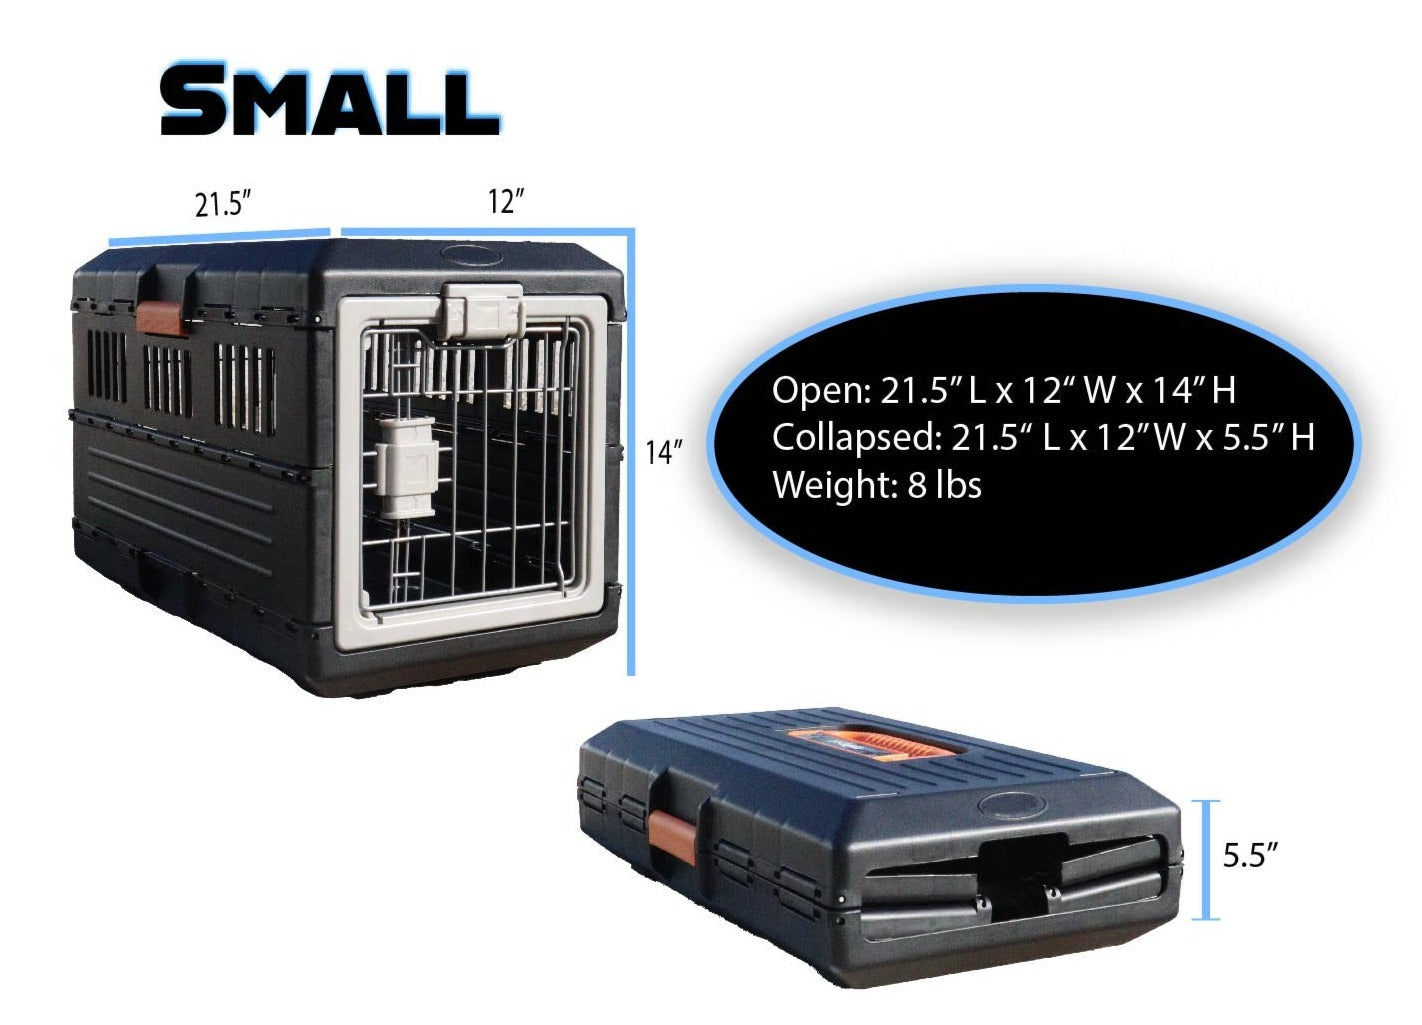 A photo of the Mirapet Small Collapsible pet crate standing, and also closed with measurements around the sides. A black oval with white text that says "Open: 21.5" L 12" W x 14"H Collapsed: 21.5"L x 12"W x5.5"H Weight: 8lbs